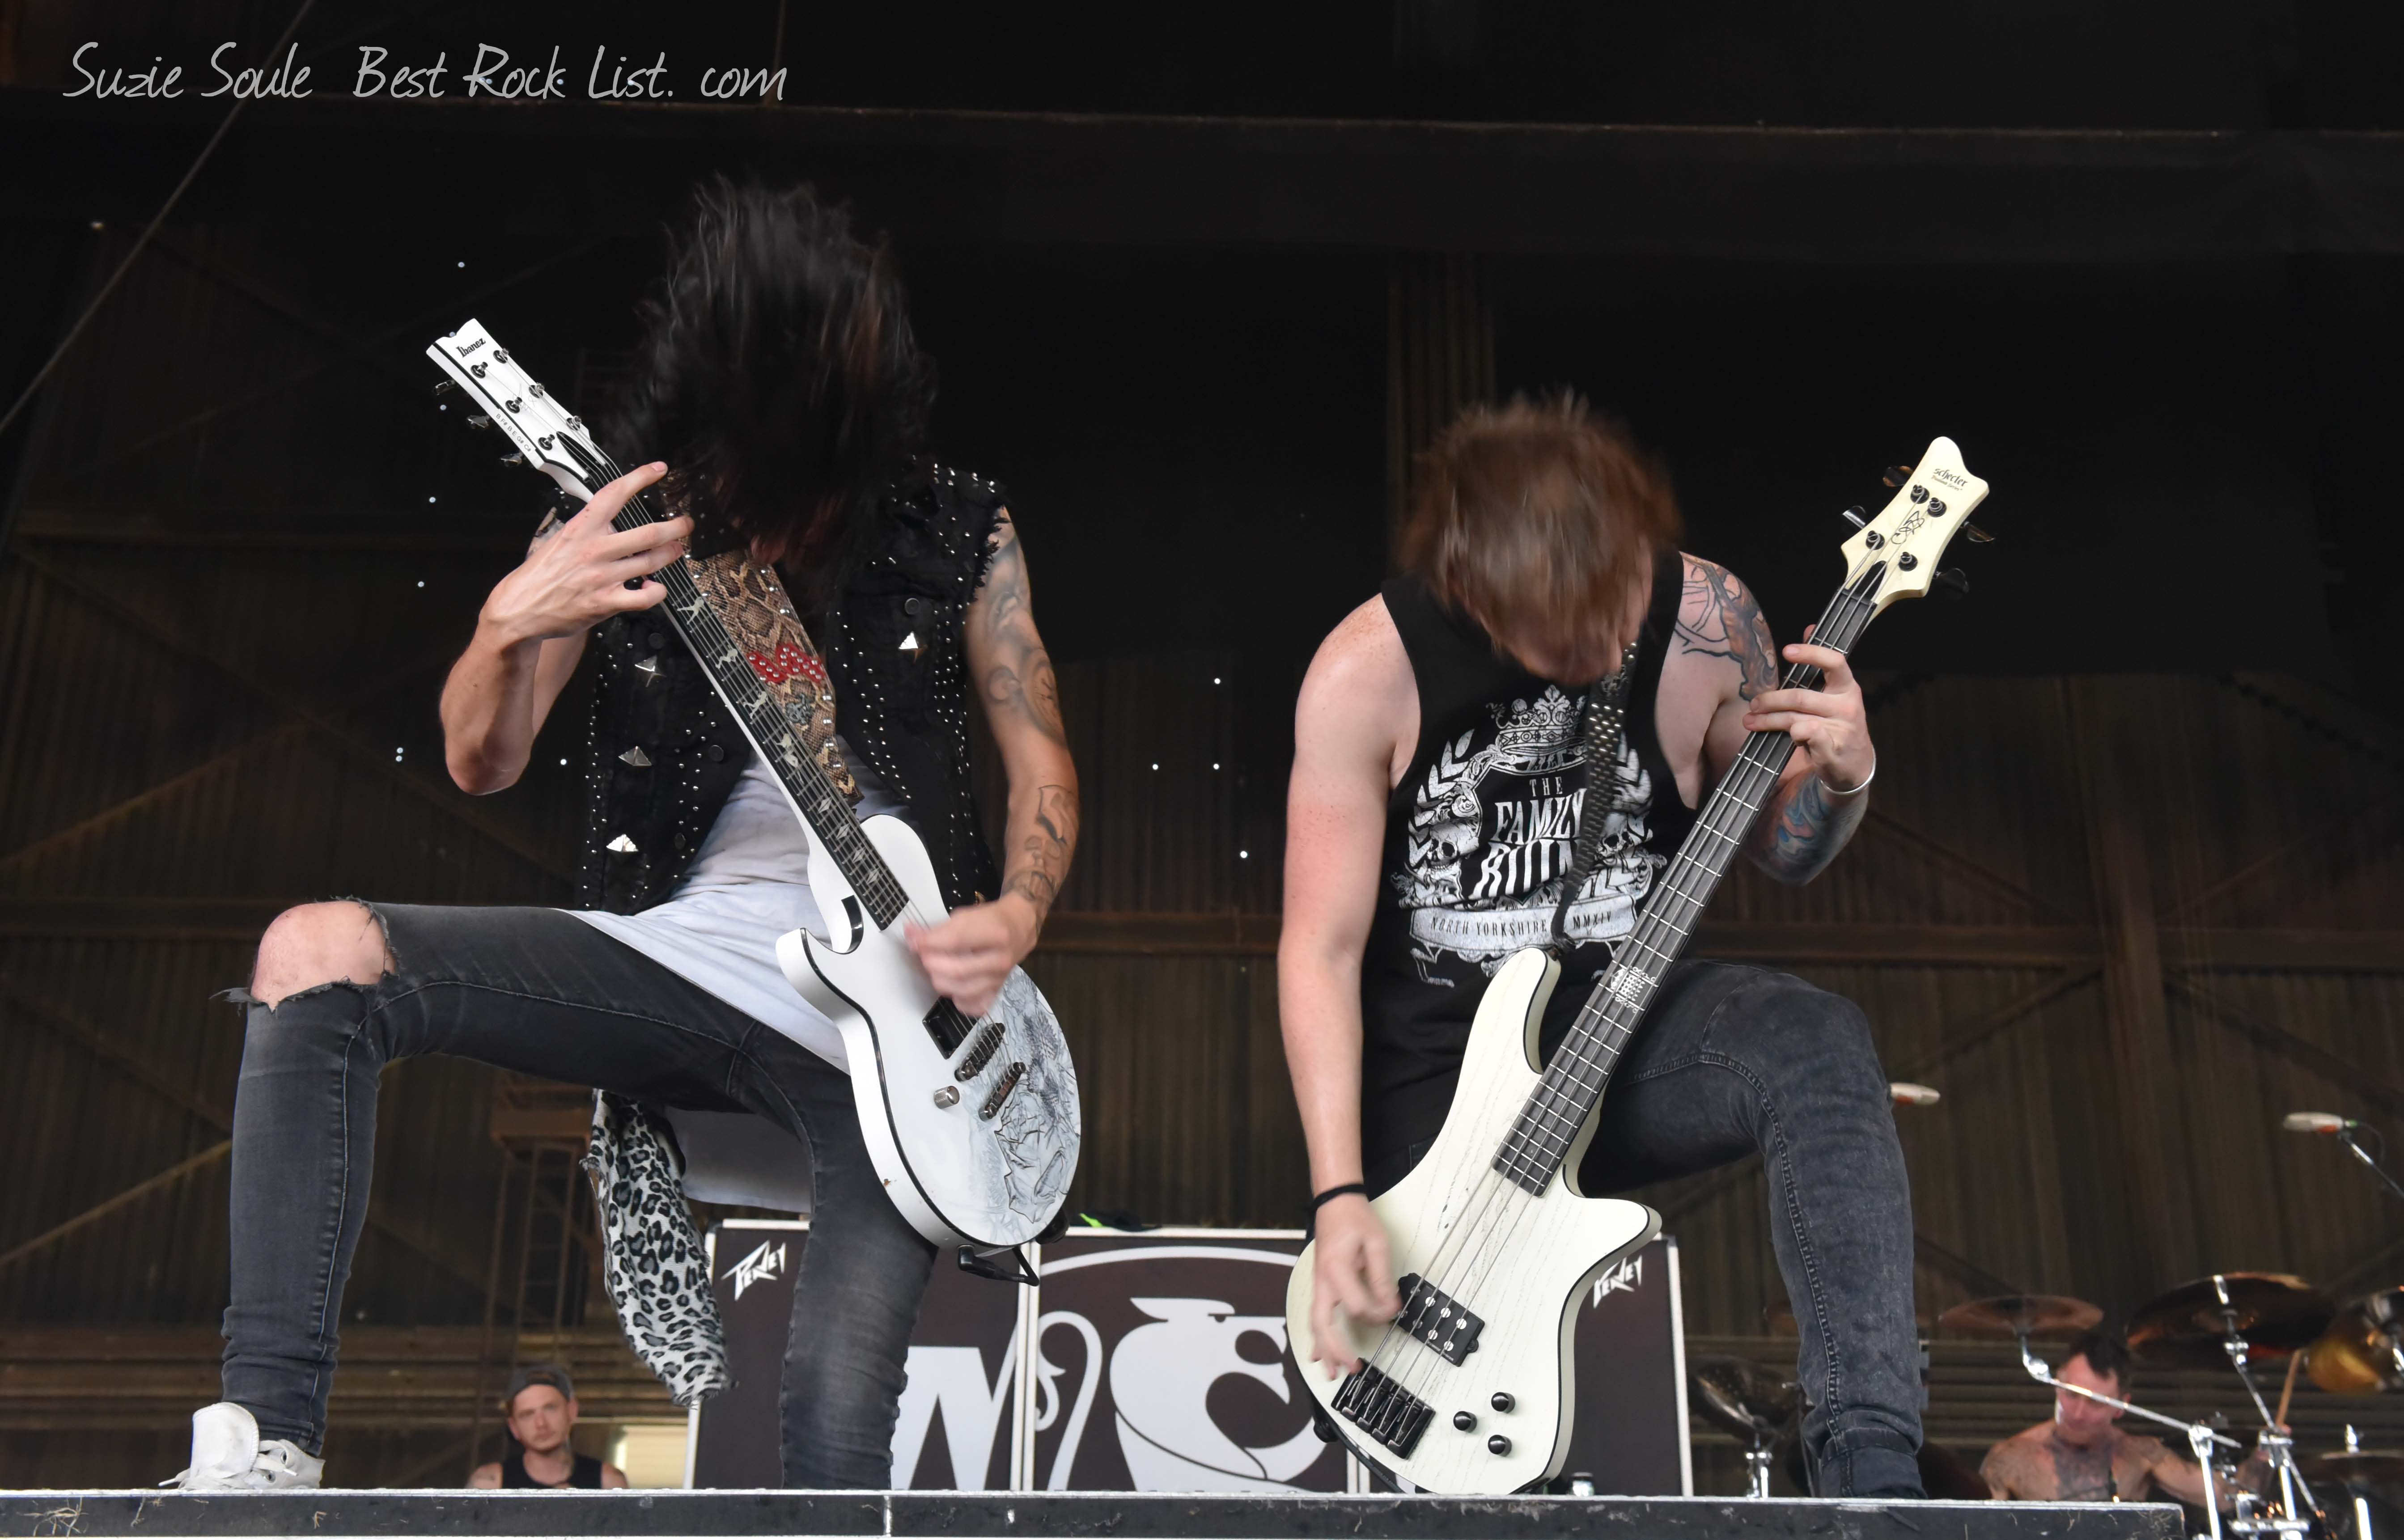 Cameron Liddell and Sam Bettley of Asking Alexandria